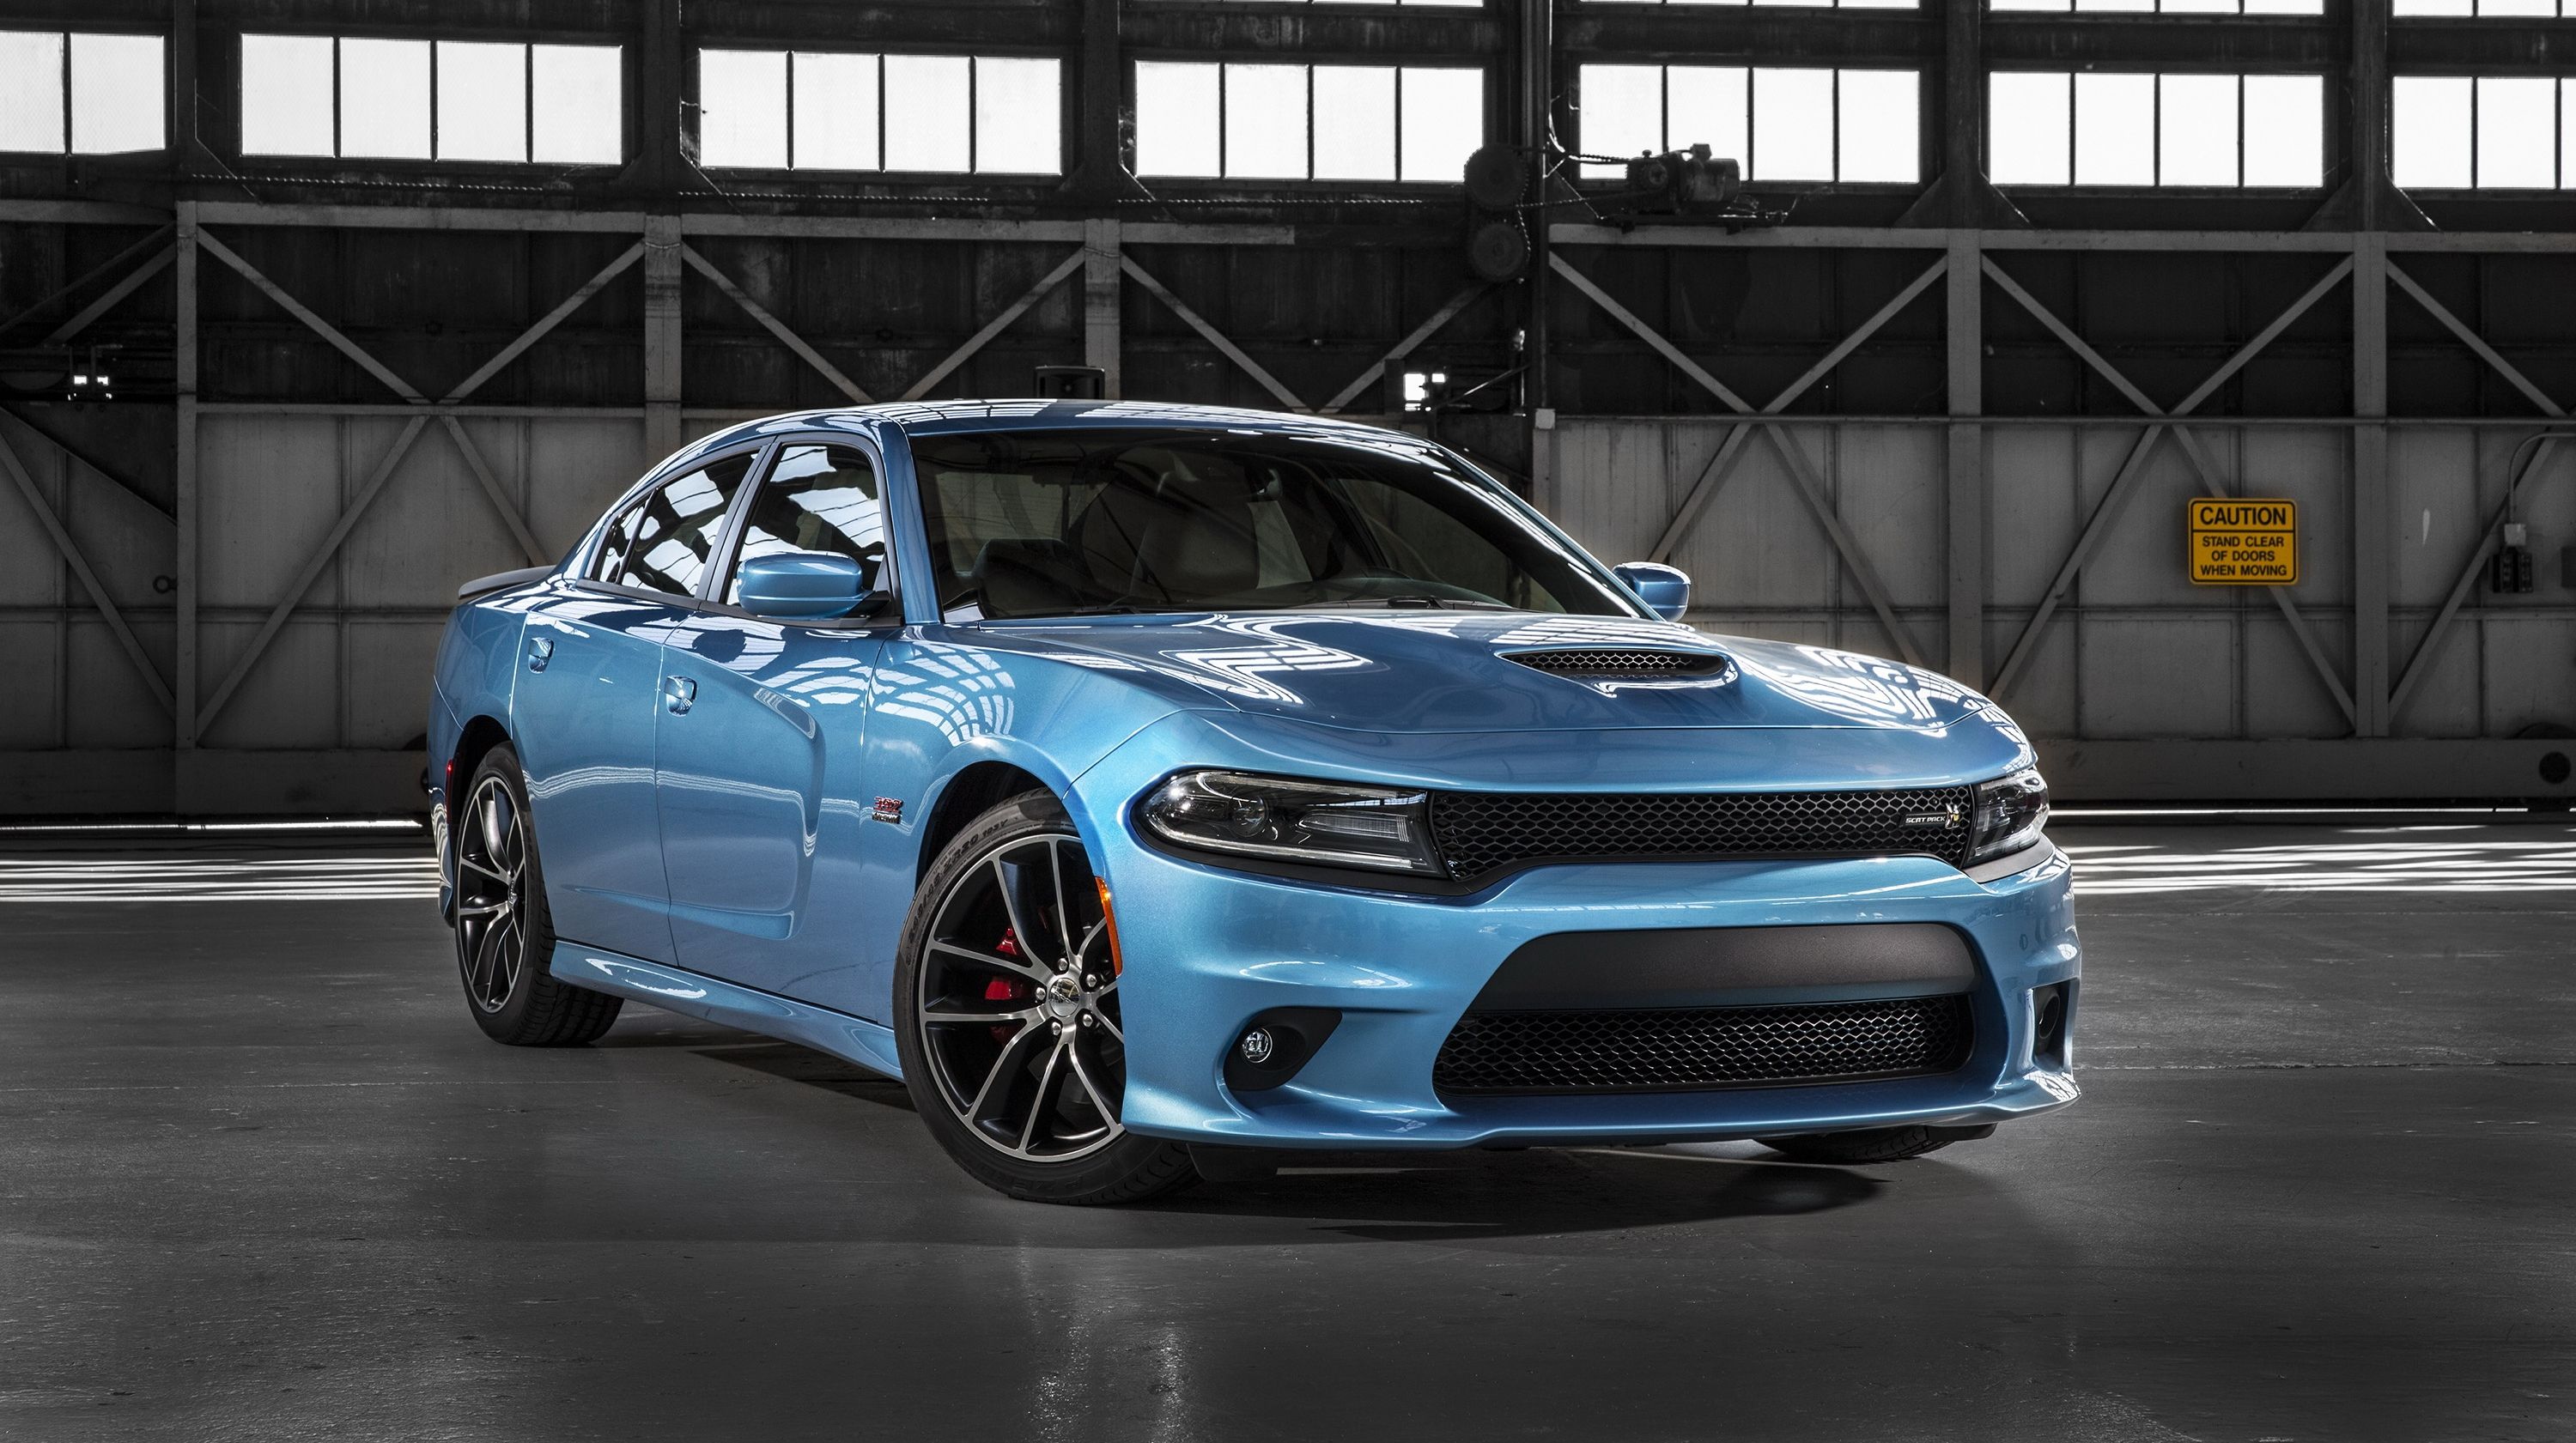  Dodge has added a Scat Pack trim level to the 2015 Charger lineup. Check it out at TopSpeed.com